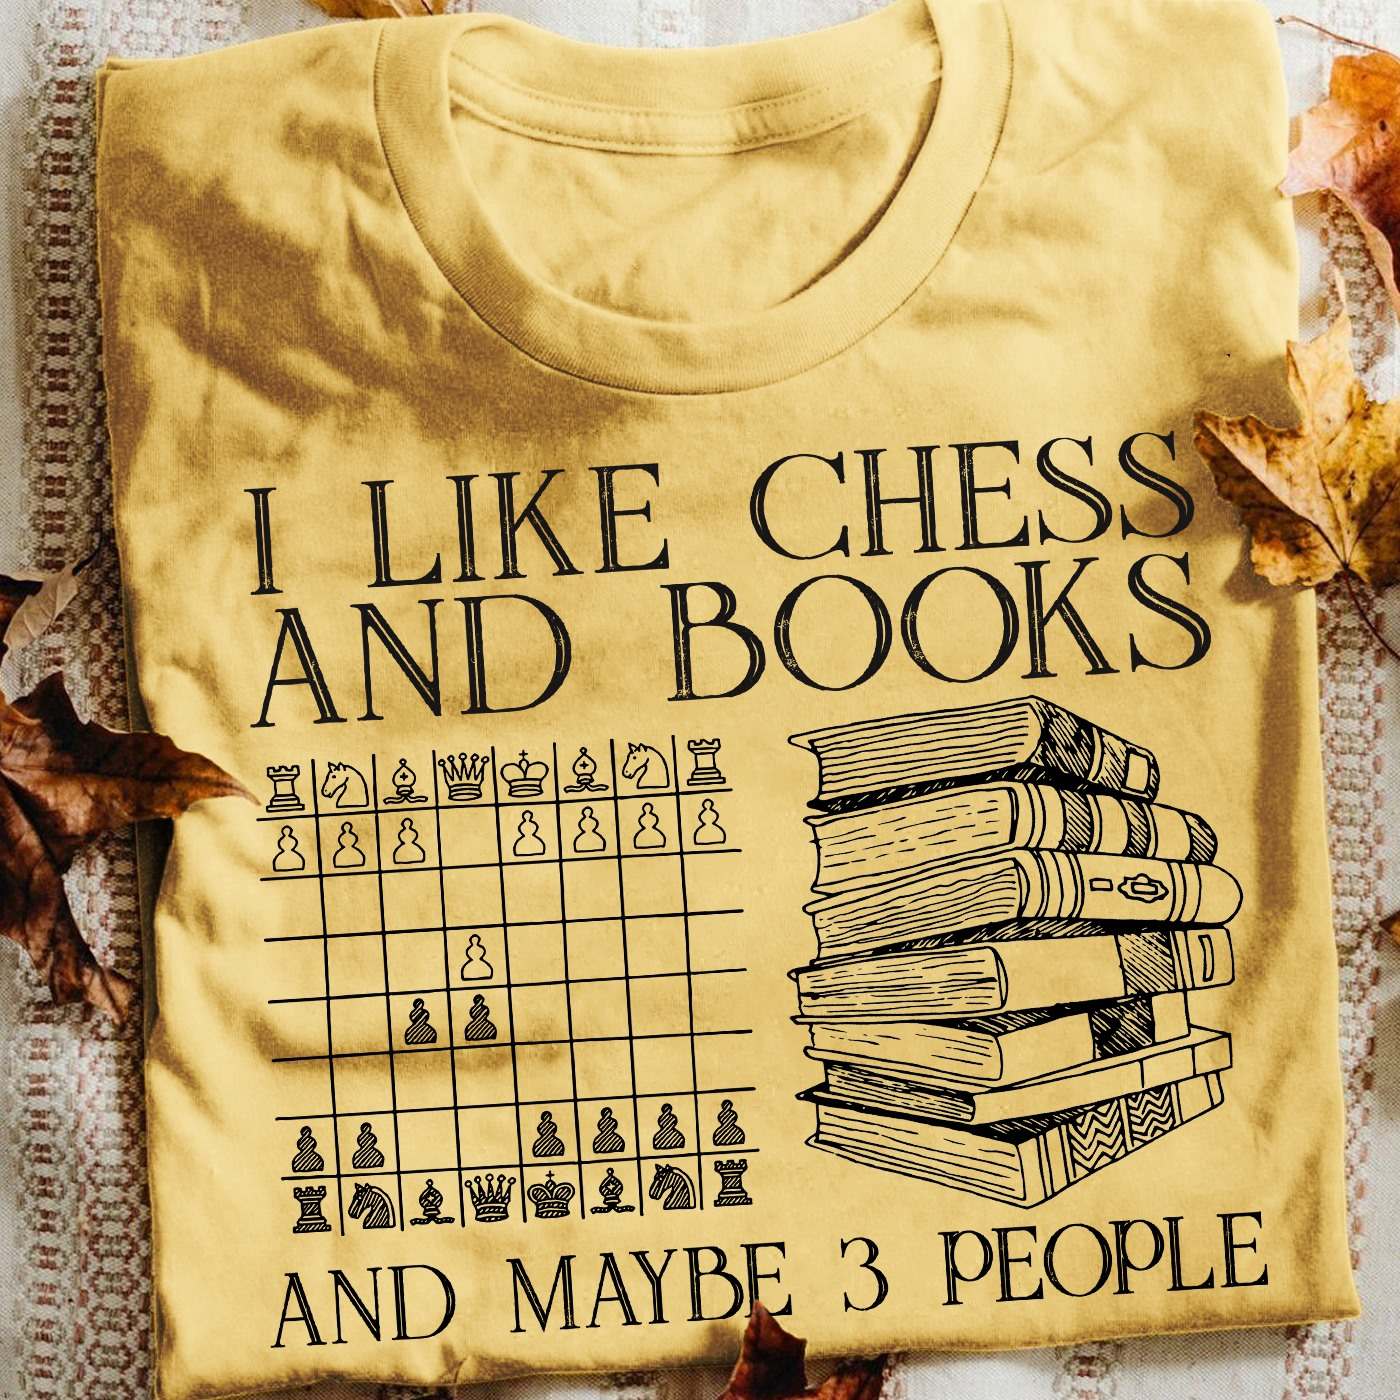 I like chess and books and maybe 3 people - Book lover